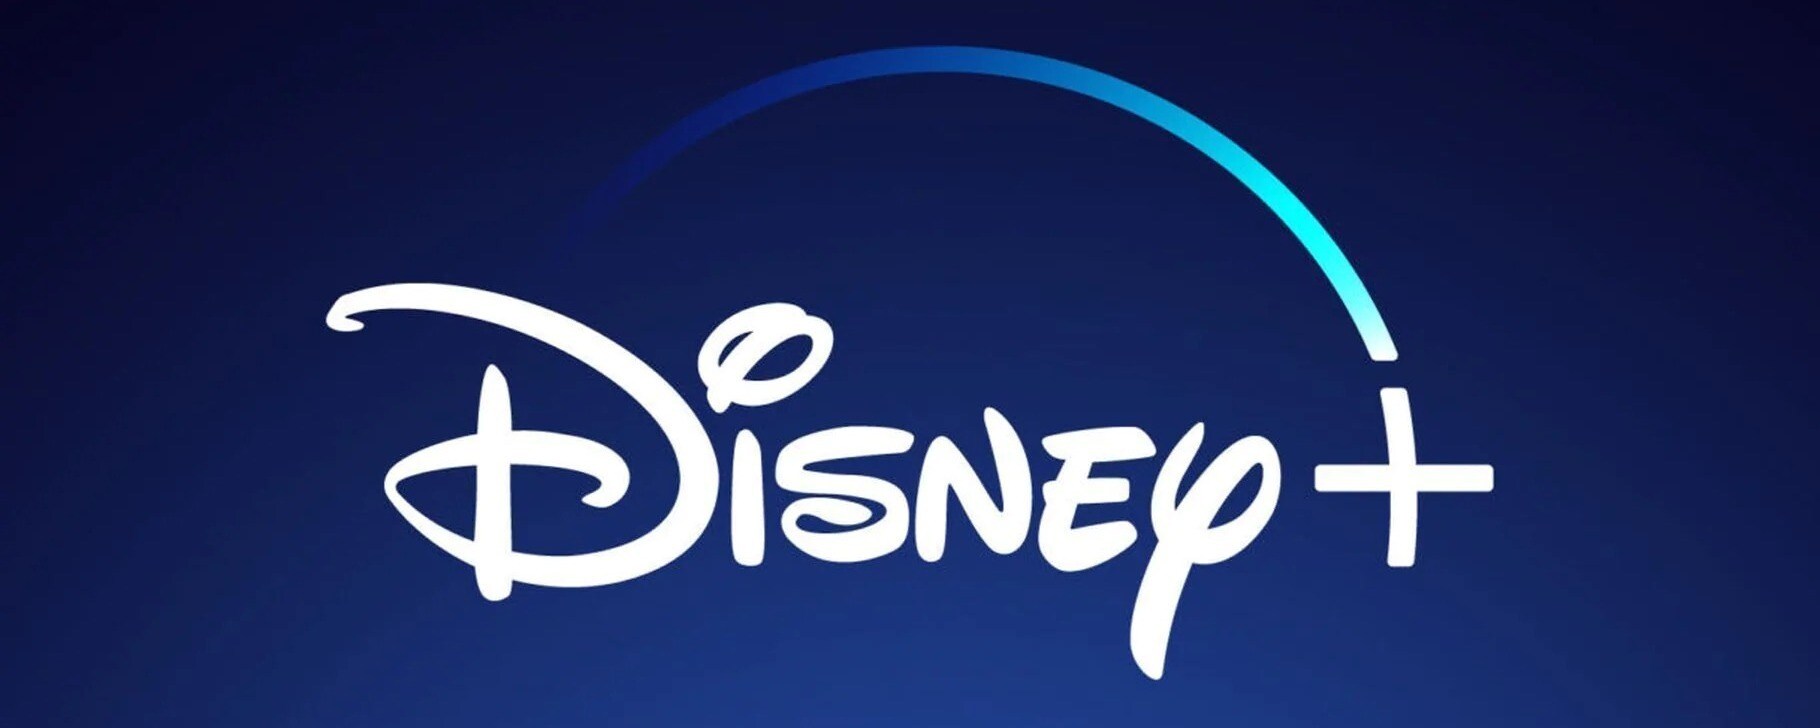 Disney+ Sees Extraordinary Consumer Demand with More Than 10 Million Sign-Ups